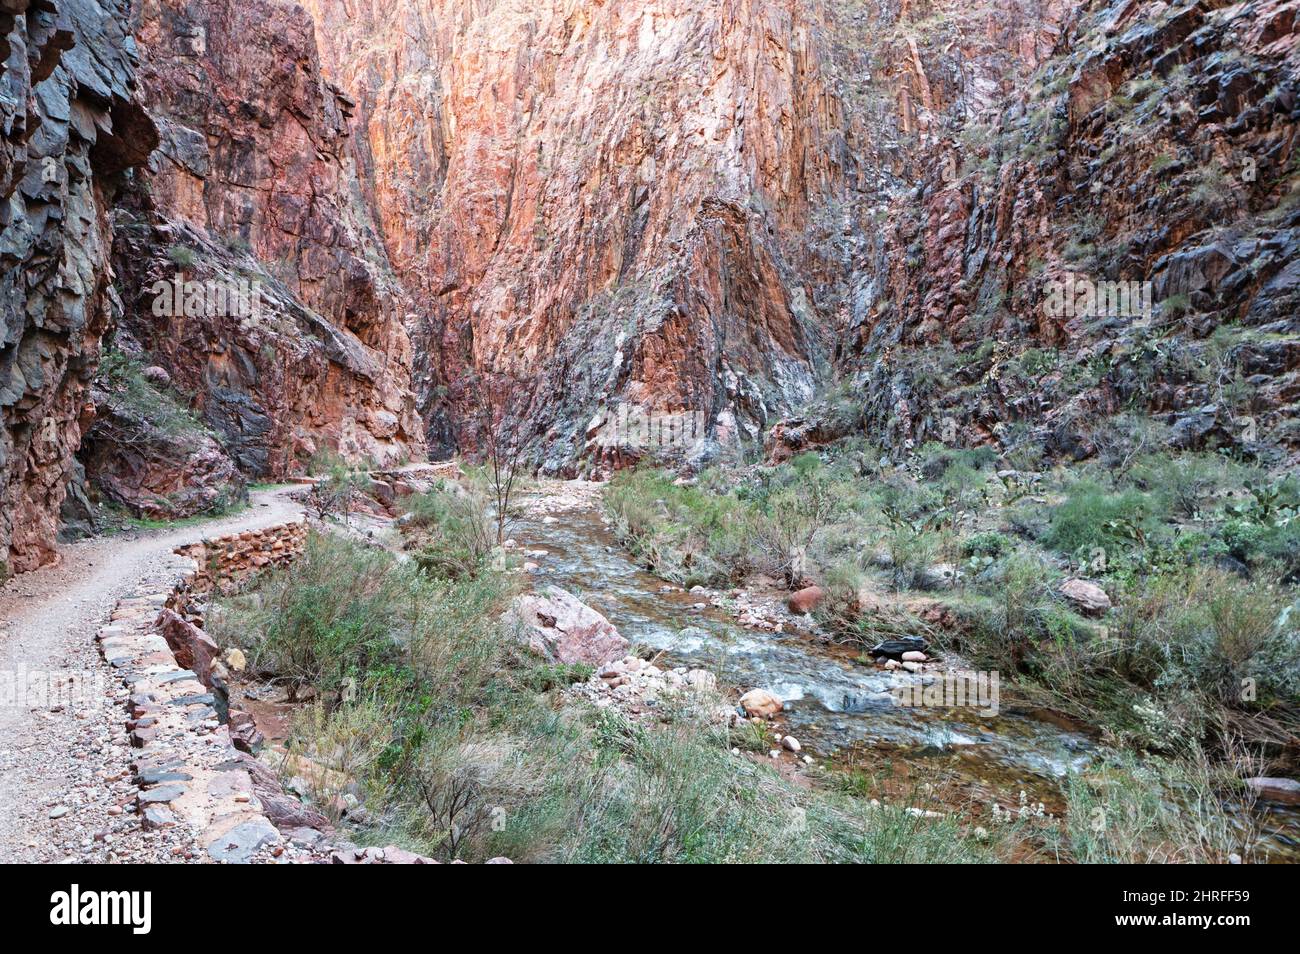 the North Kaibab Trail winds beneath the cliffs of the Grand Canyon along Bright Angel Creek Stock Photo